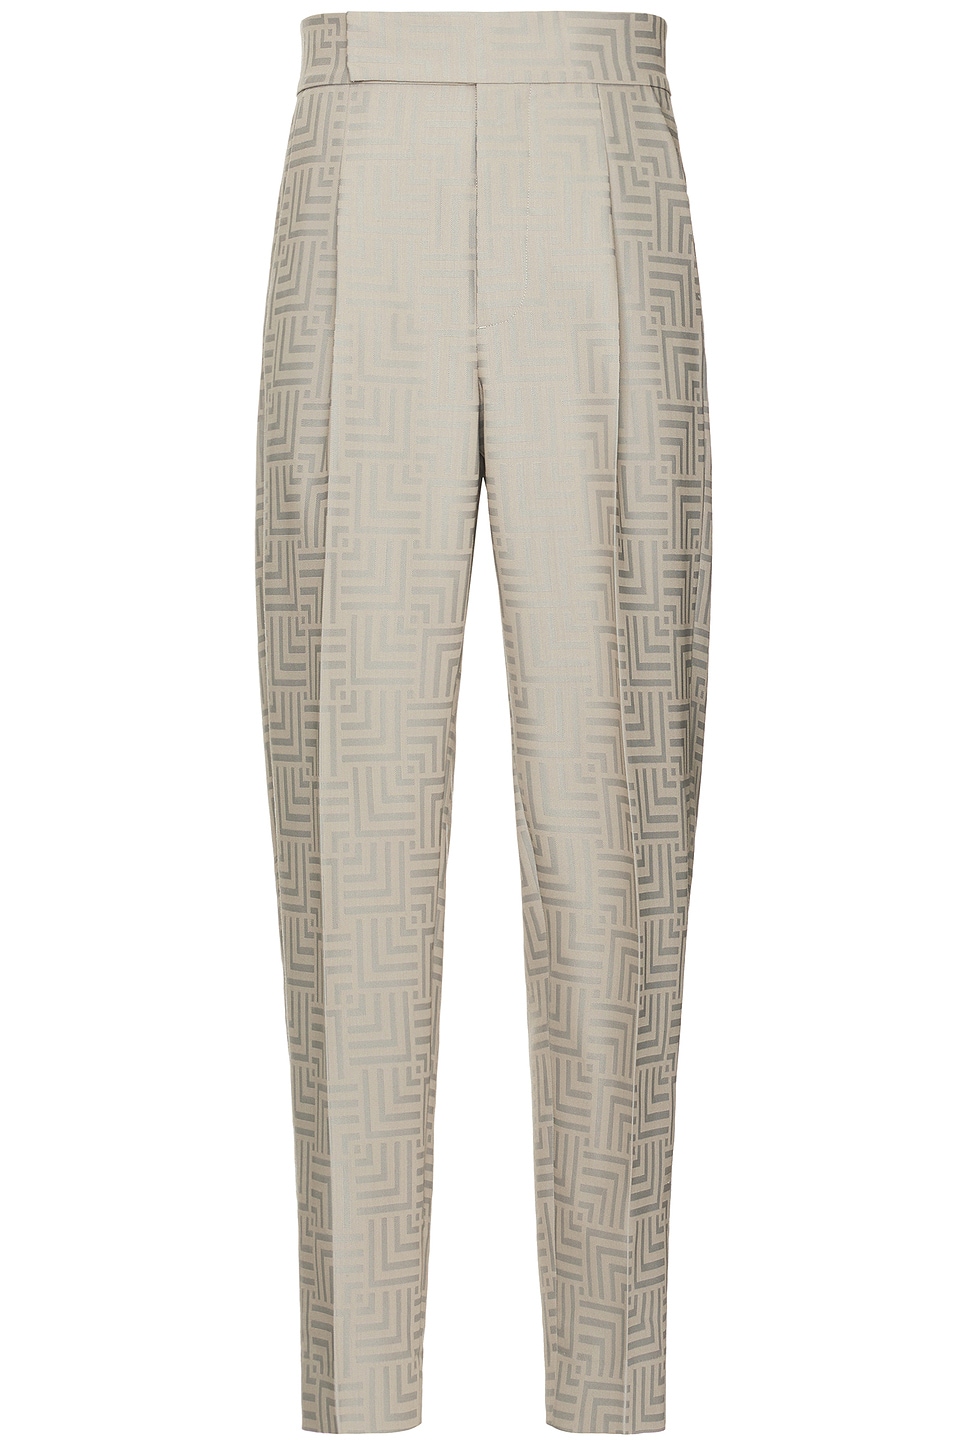 Image 1 of Fear of God Single Pleat Tapered Trouser in Dove Grey